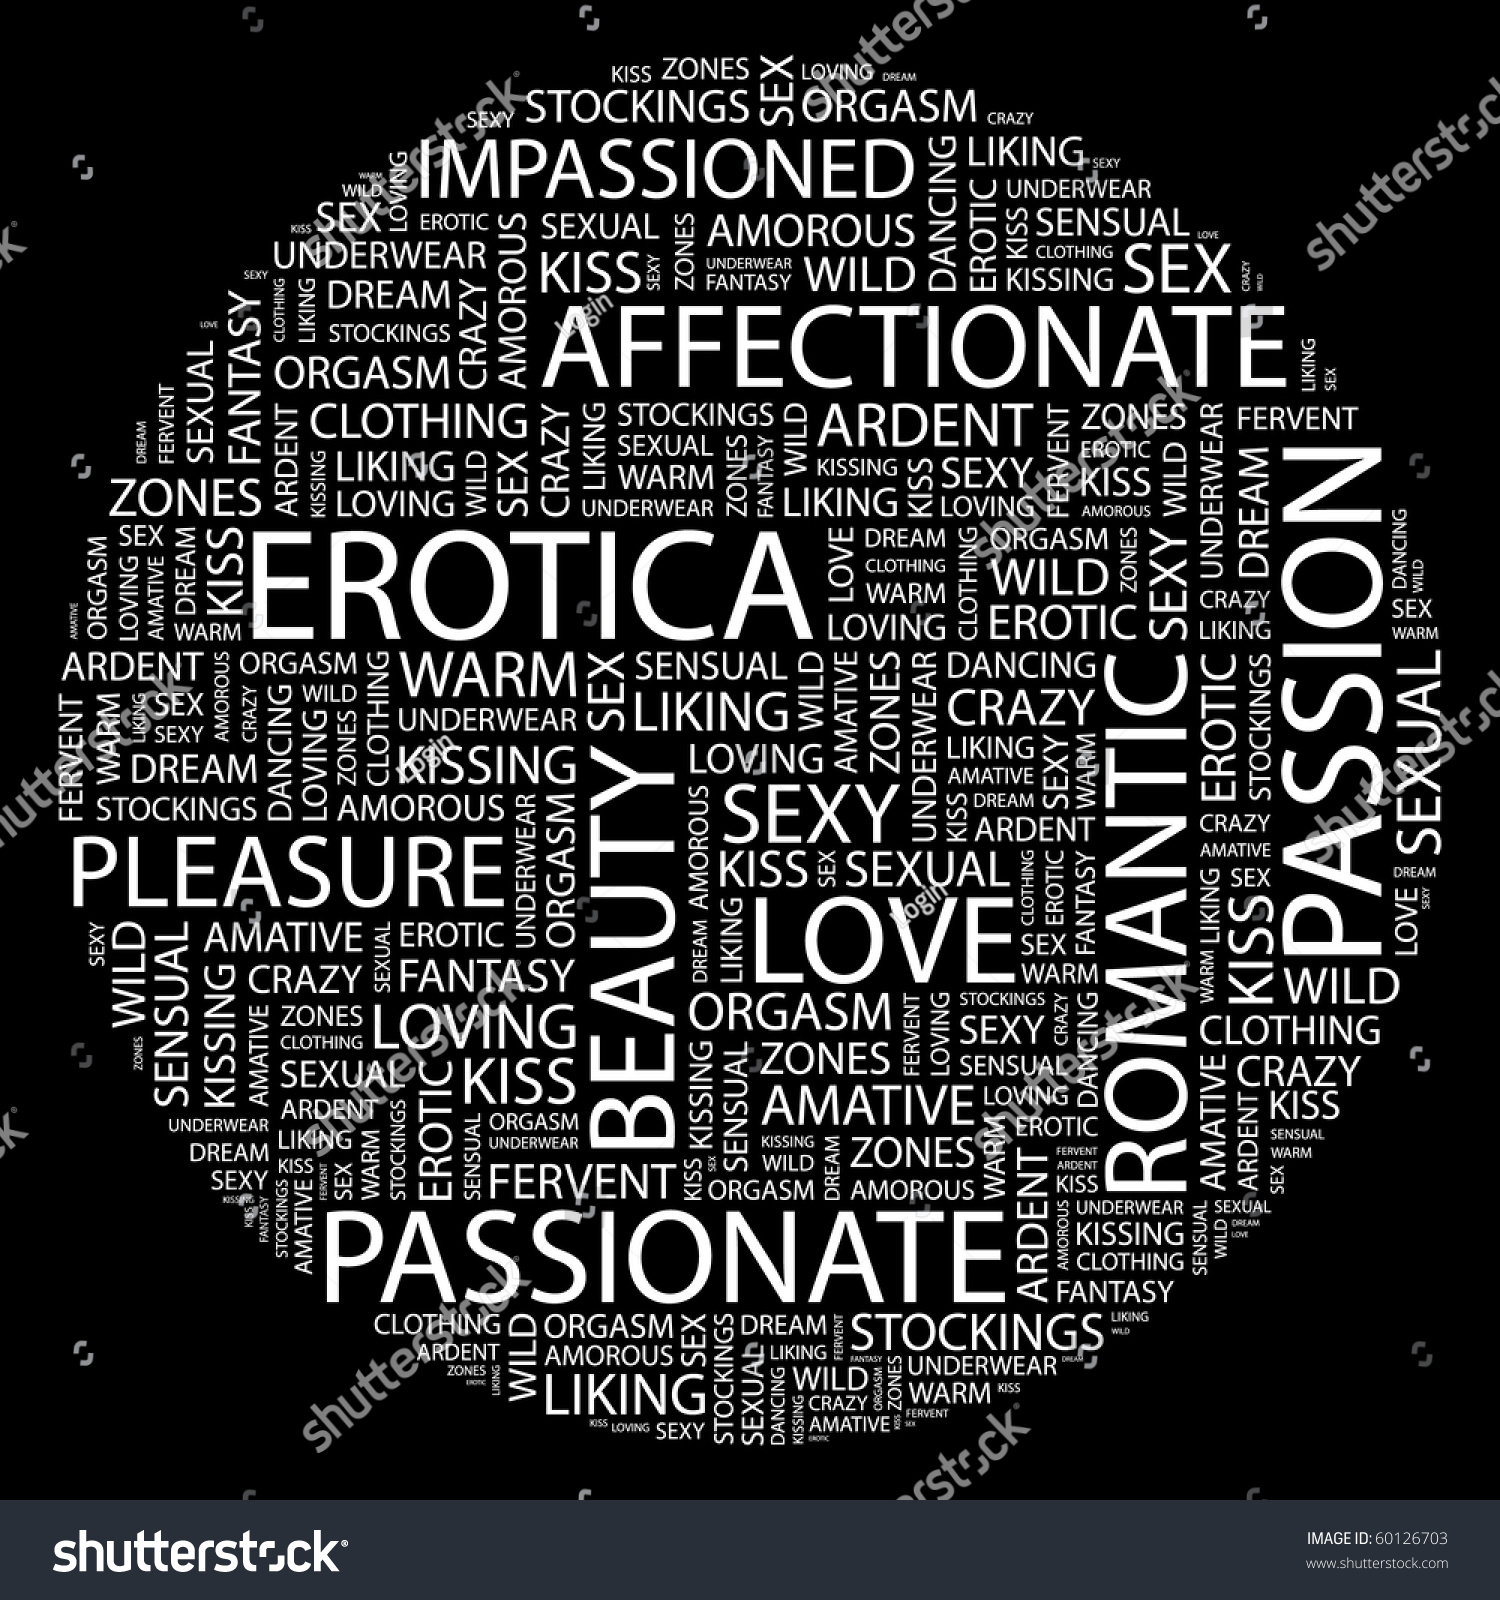 Erotica Word Collage On Black Background Stock Vector Royalty Free 60126703 Shutterstock 7983